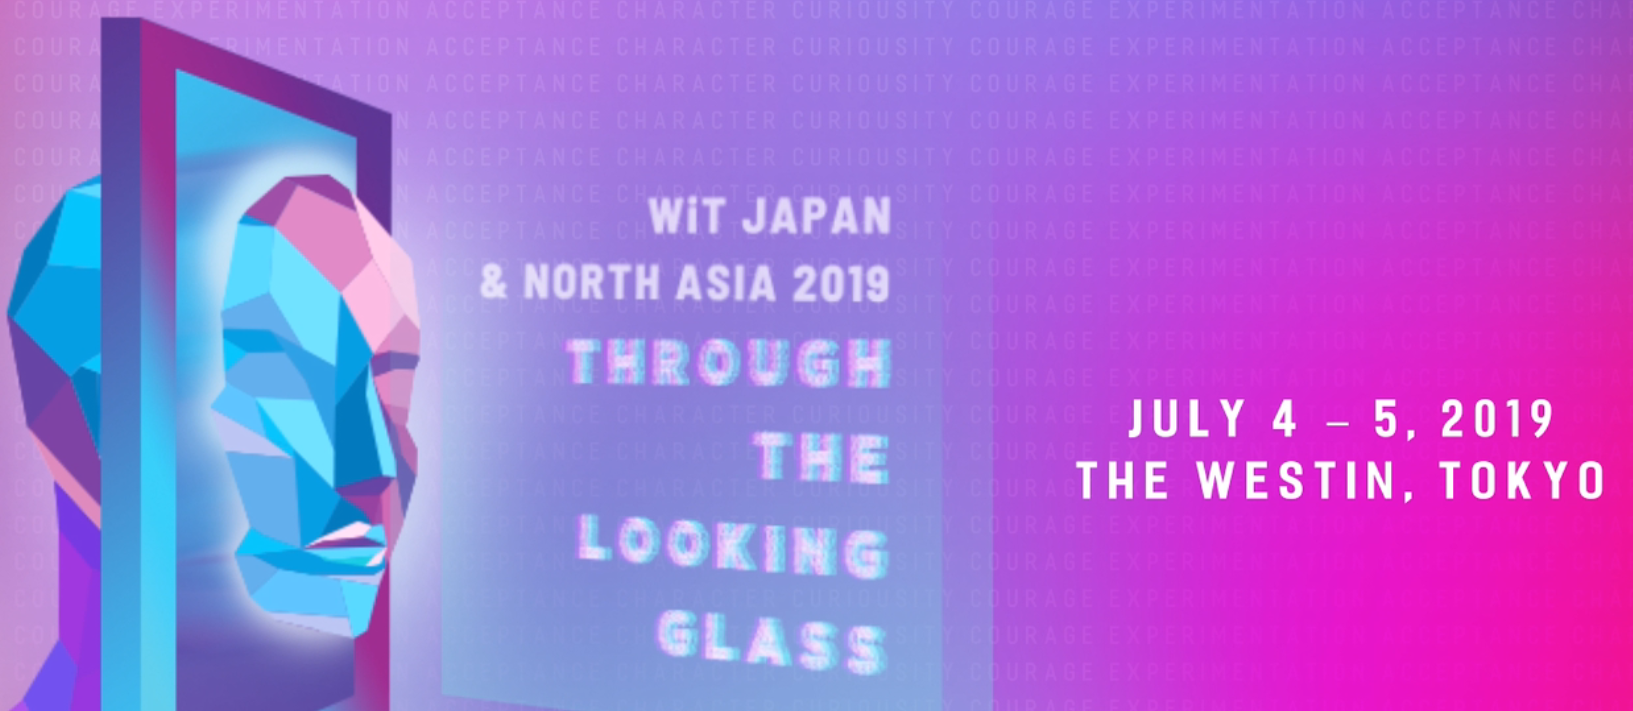 WIT Japan & North Asia 2019